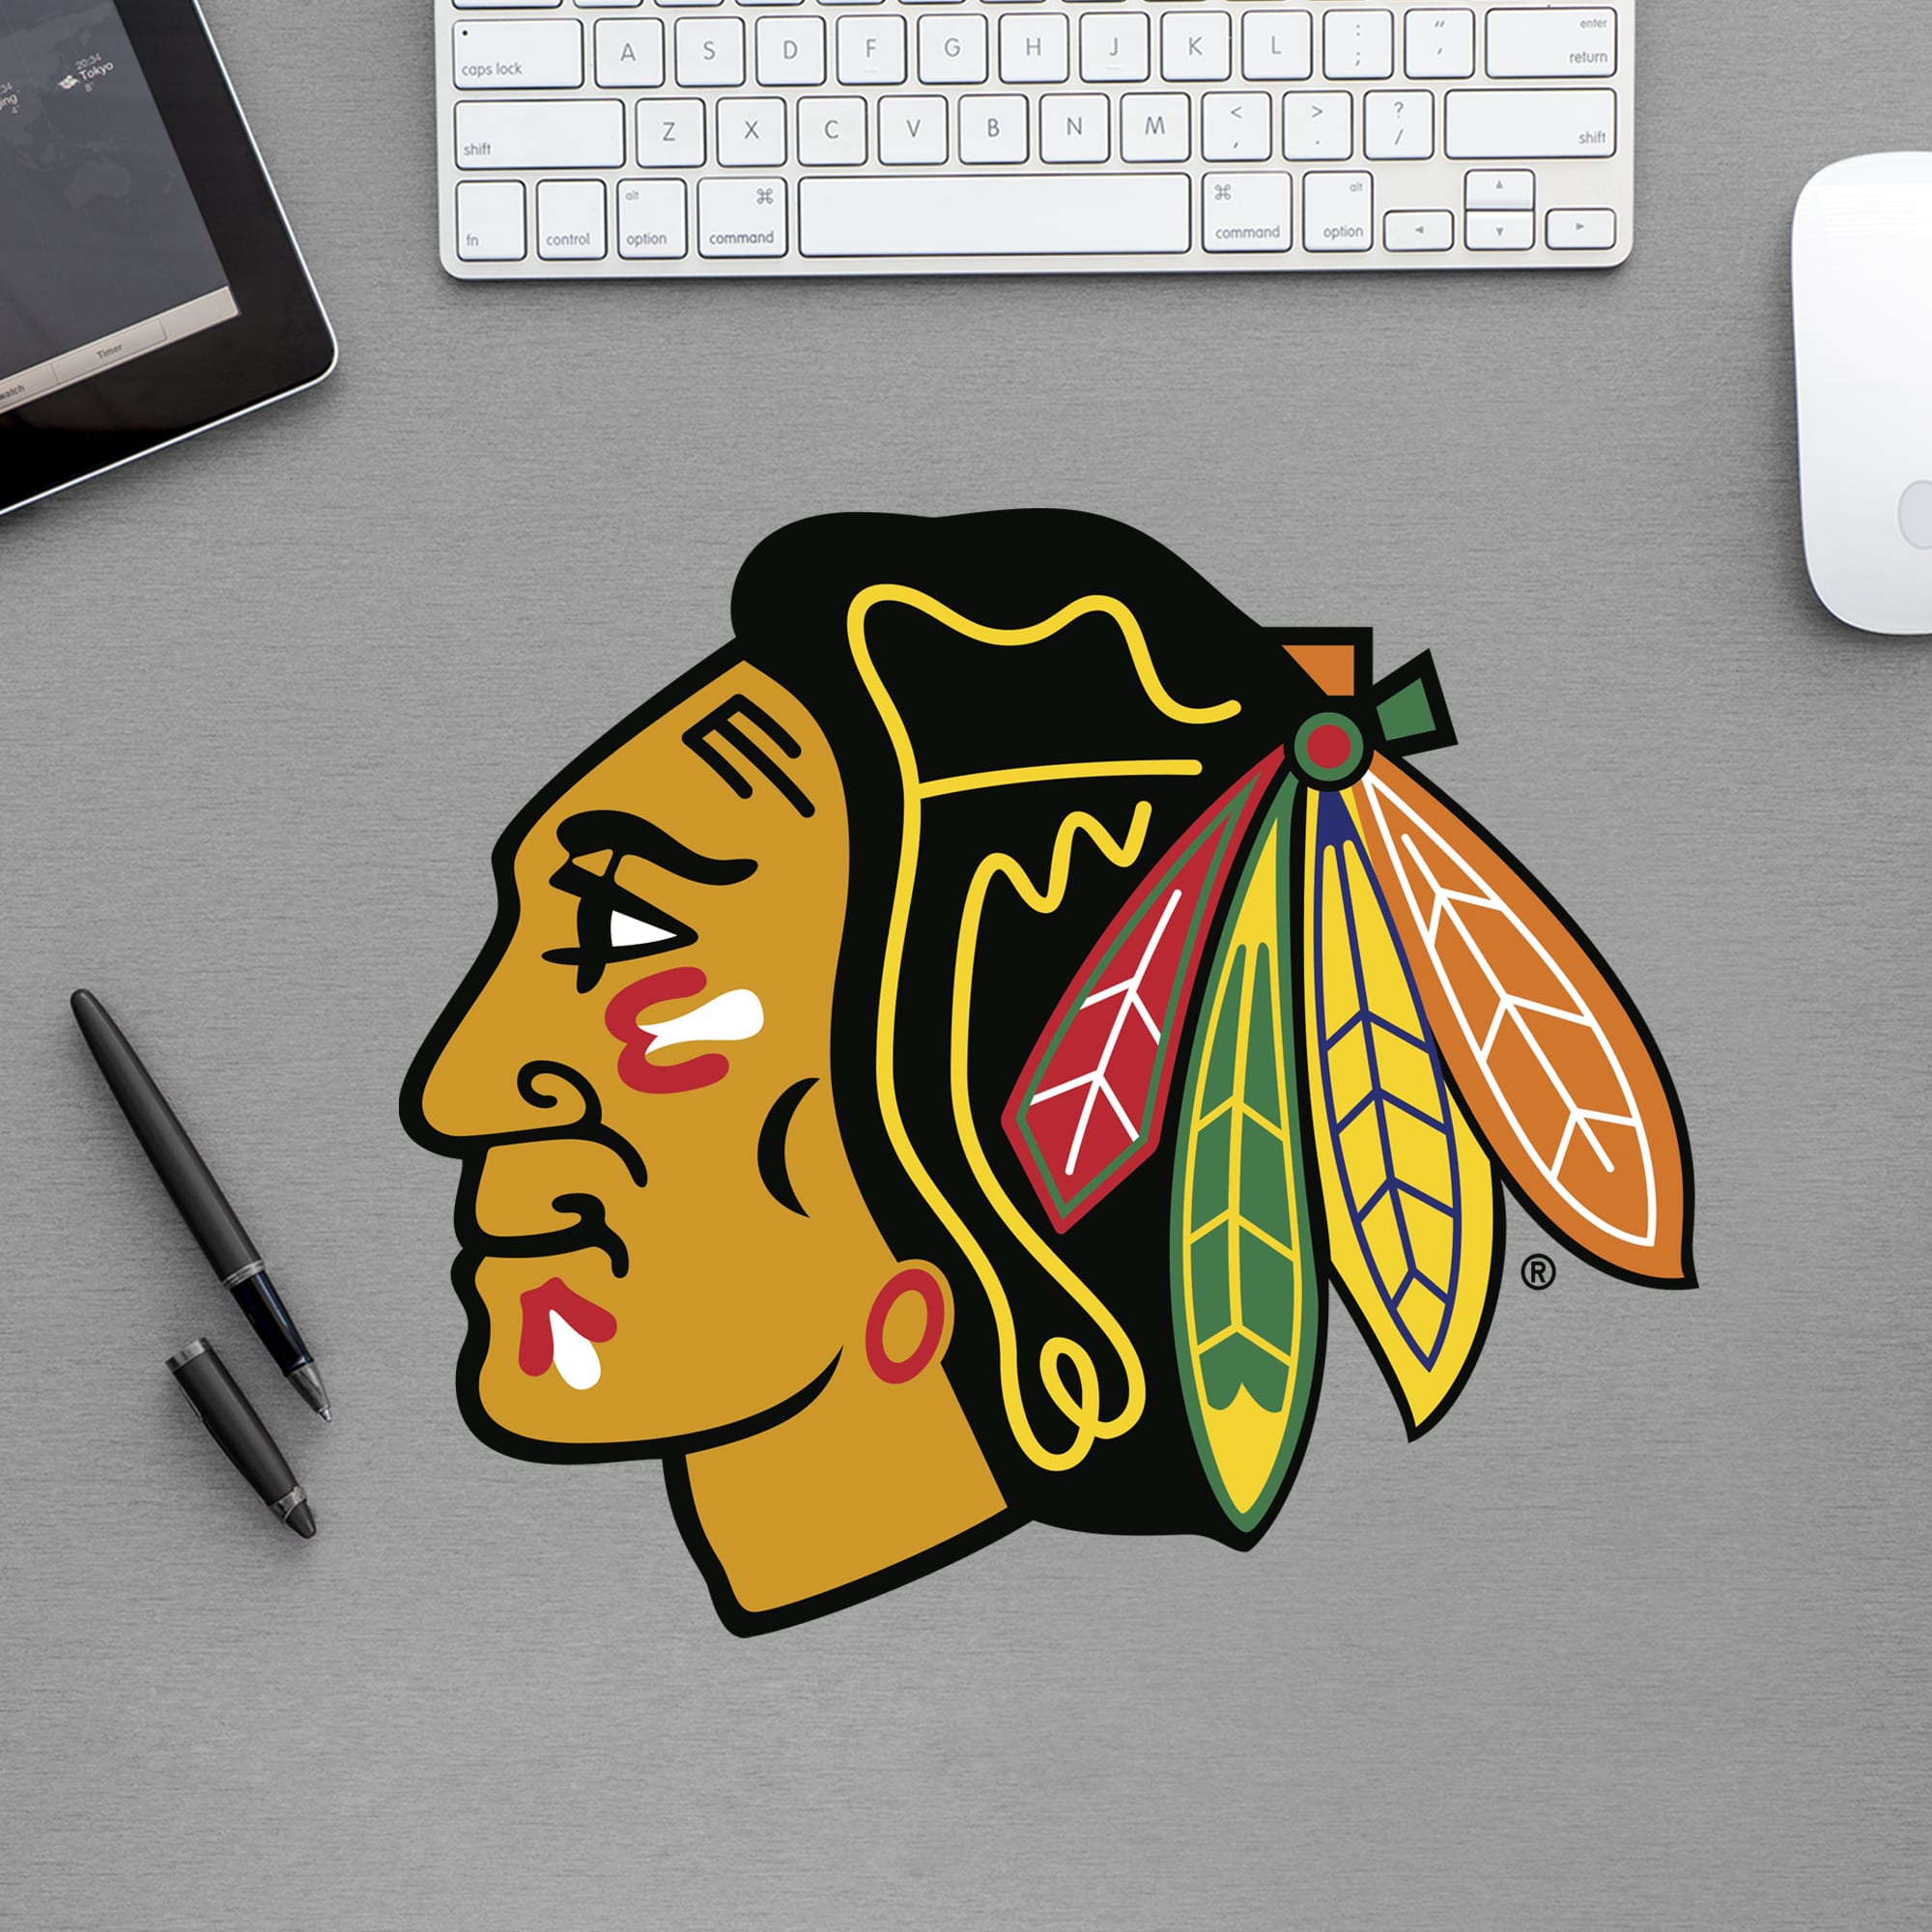 Chicago Blackhawks: Logo - Officially Licensed NHL Removable Wall Decal Large by Fathead | Vinyl